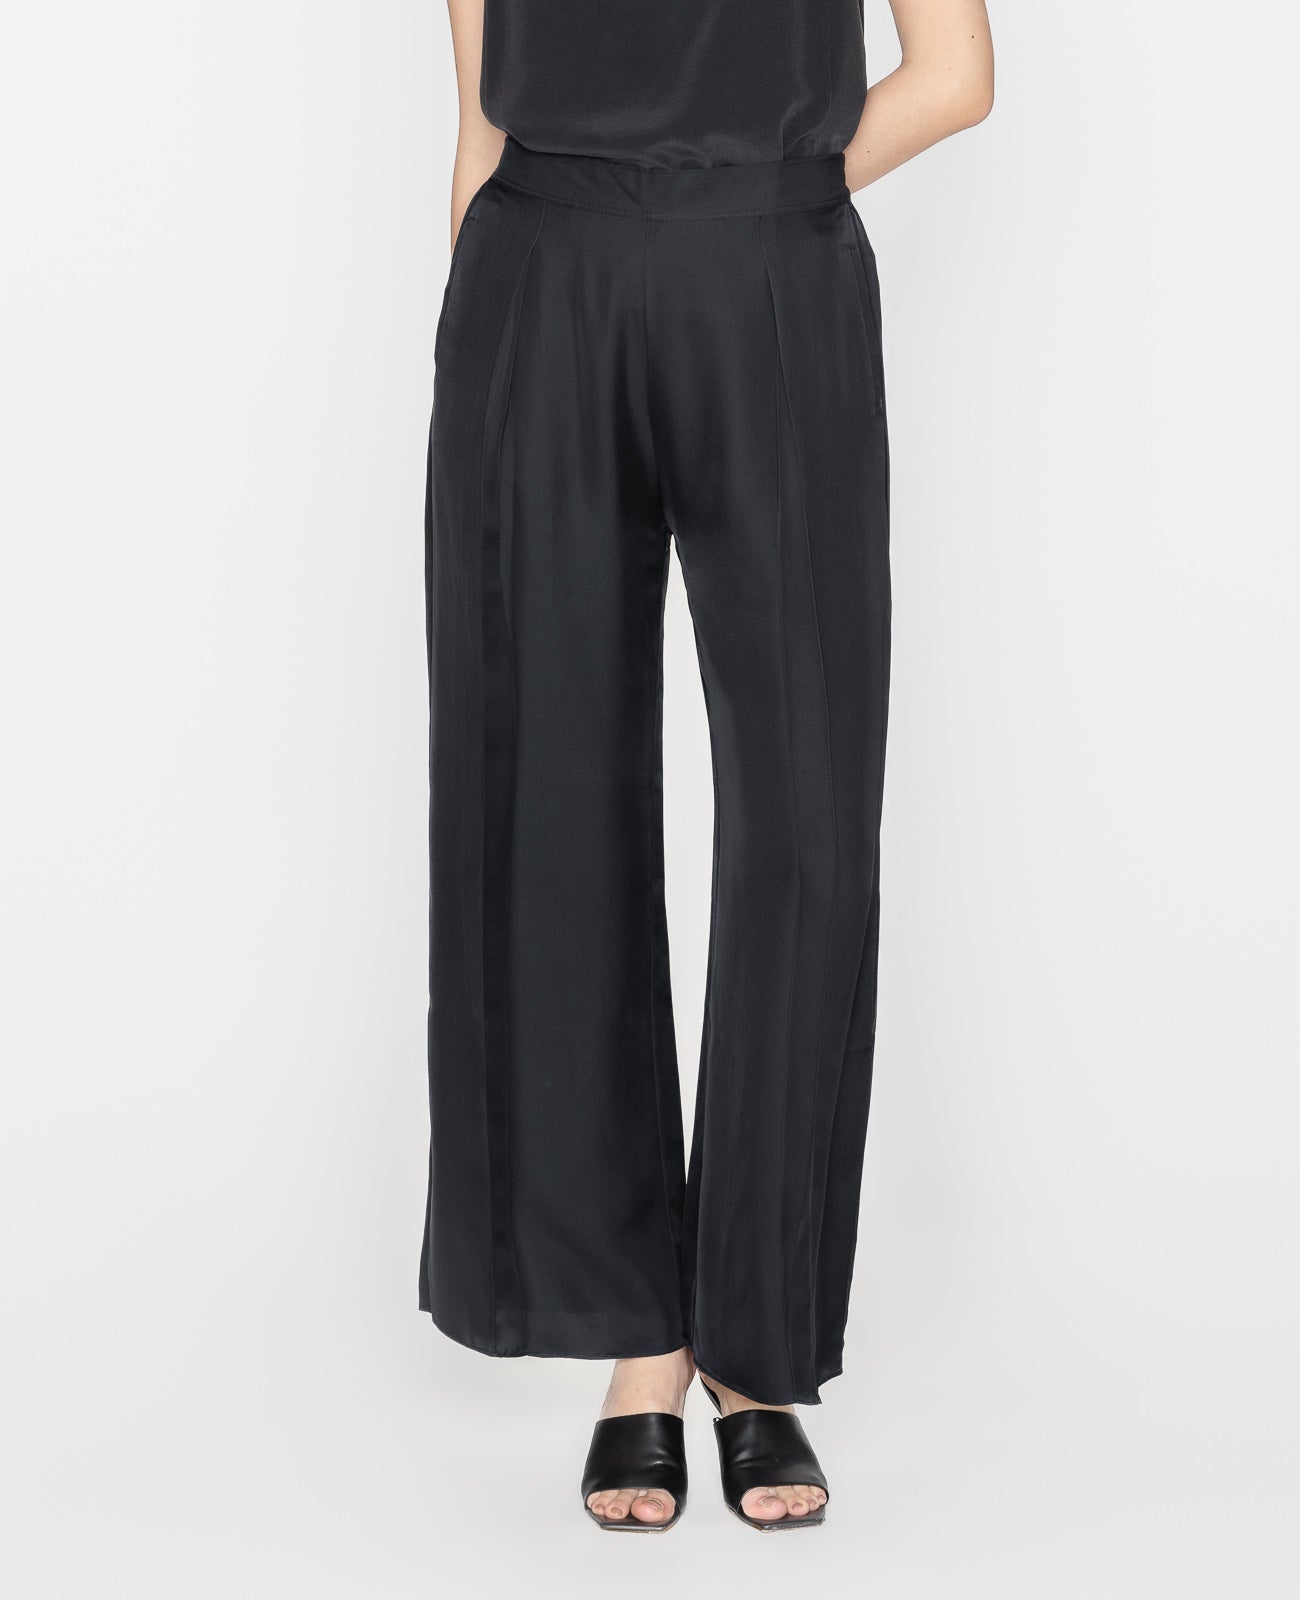 Grana Review Silk Ankle Pants Review — Fairly Curated